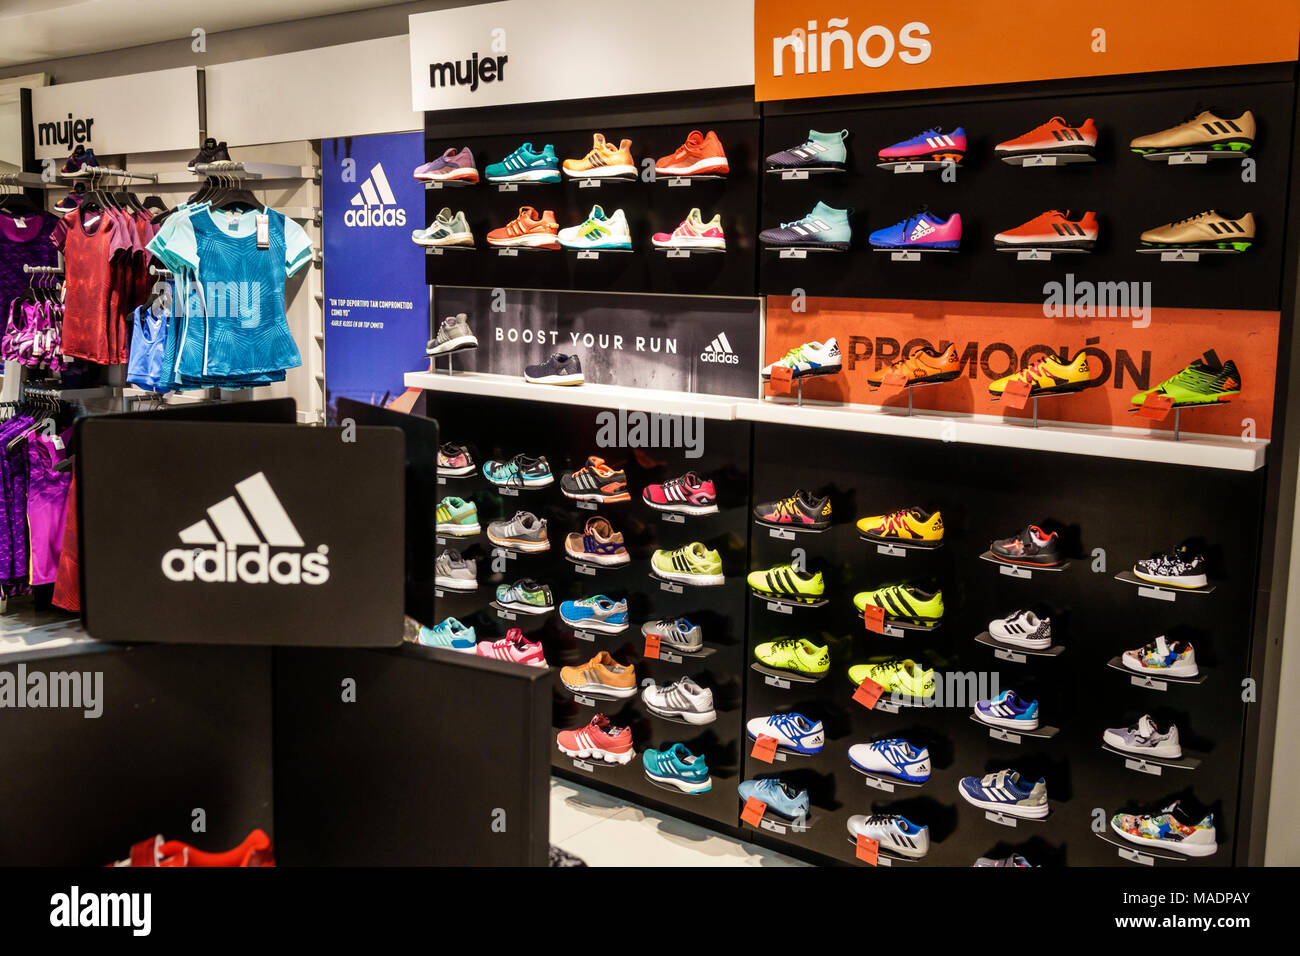 Buenos Aires Argentina,Recoleta mall,Adidas,brand store,athletic sportswear,sneakers,running shoes,women's,children's,Spanish language sign,Hispanic,A Stock Photo